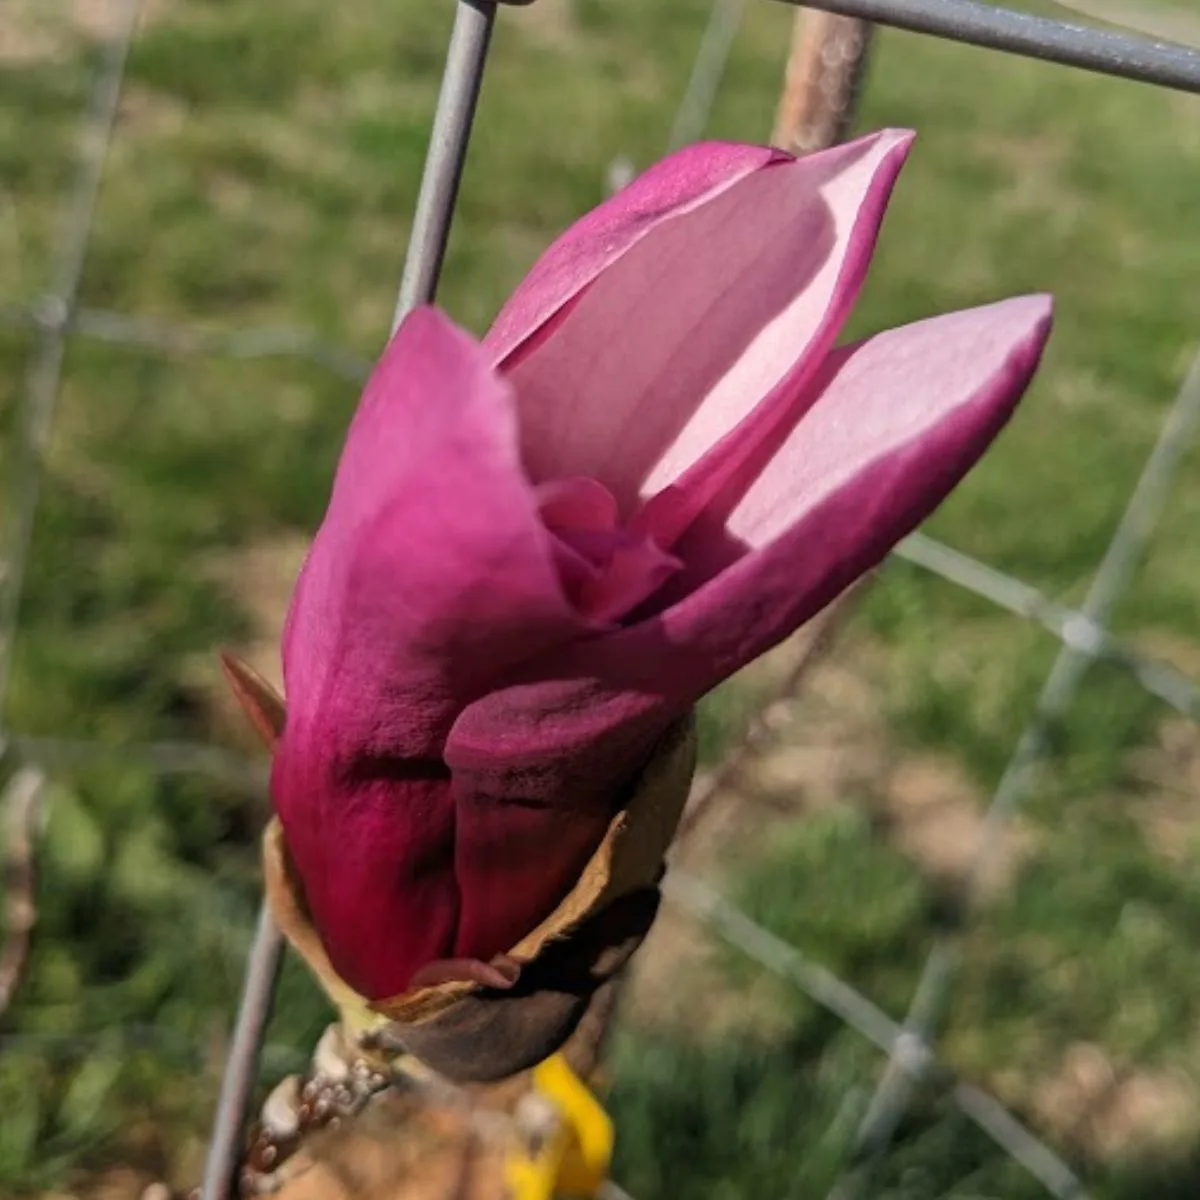 the first bloom of my Jane magnolia tree. 